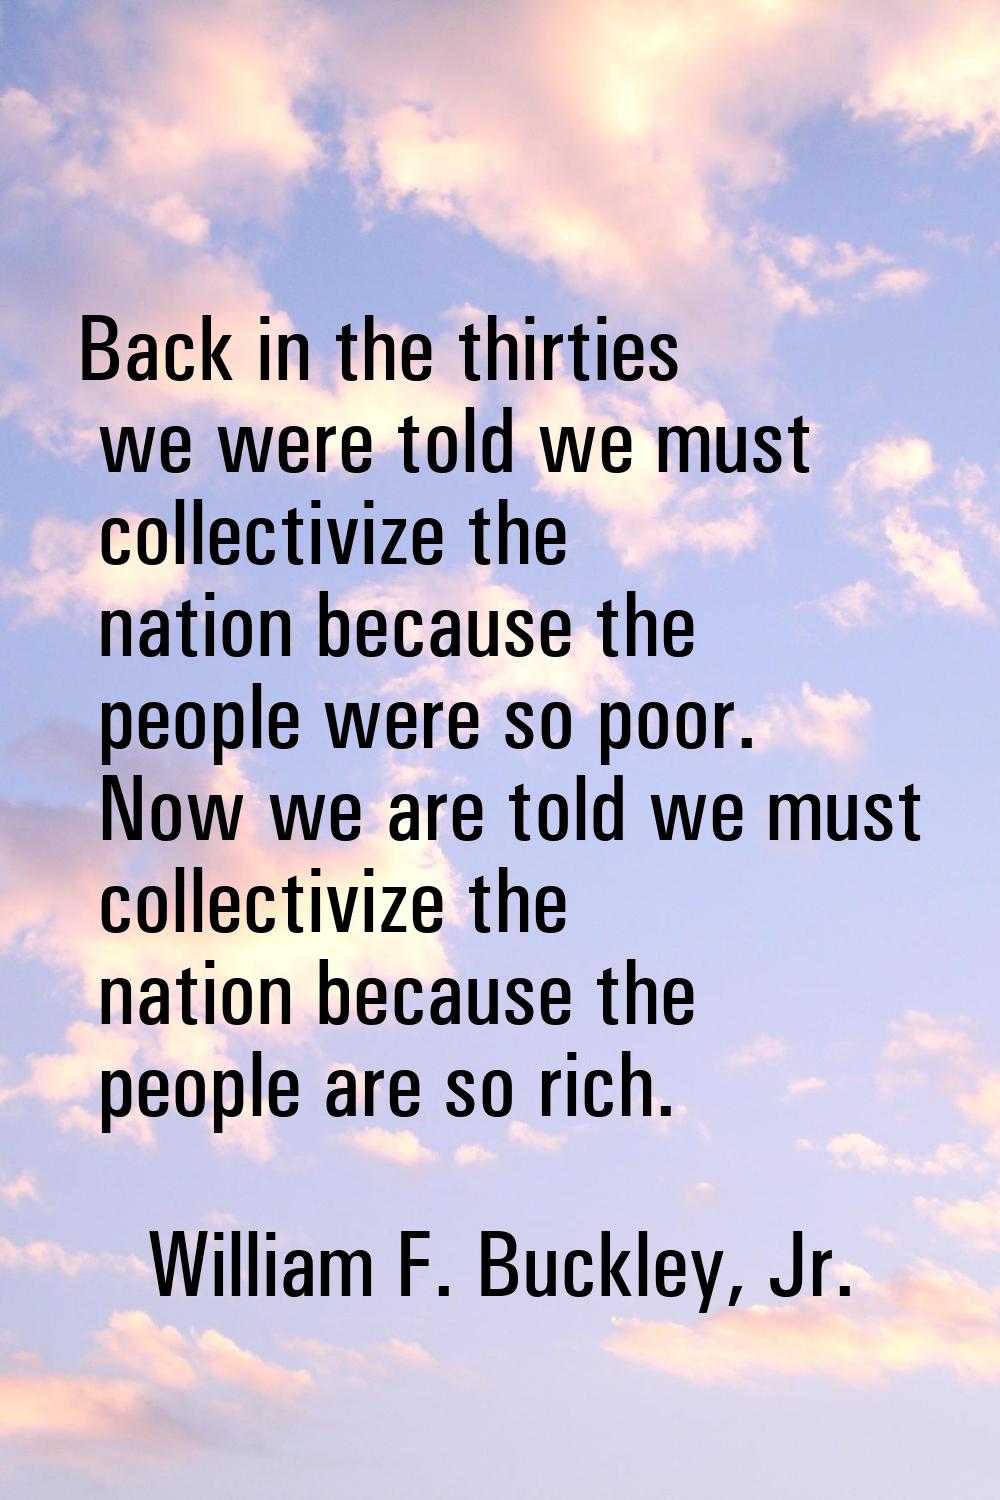 Back in the thirties we were told we must collectivize the nation because the people were so poor. 